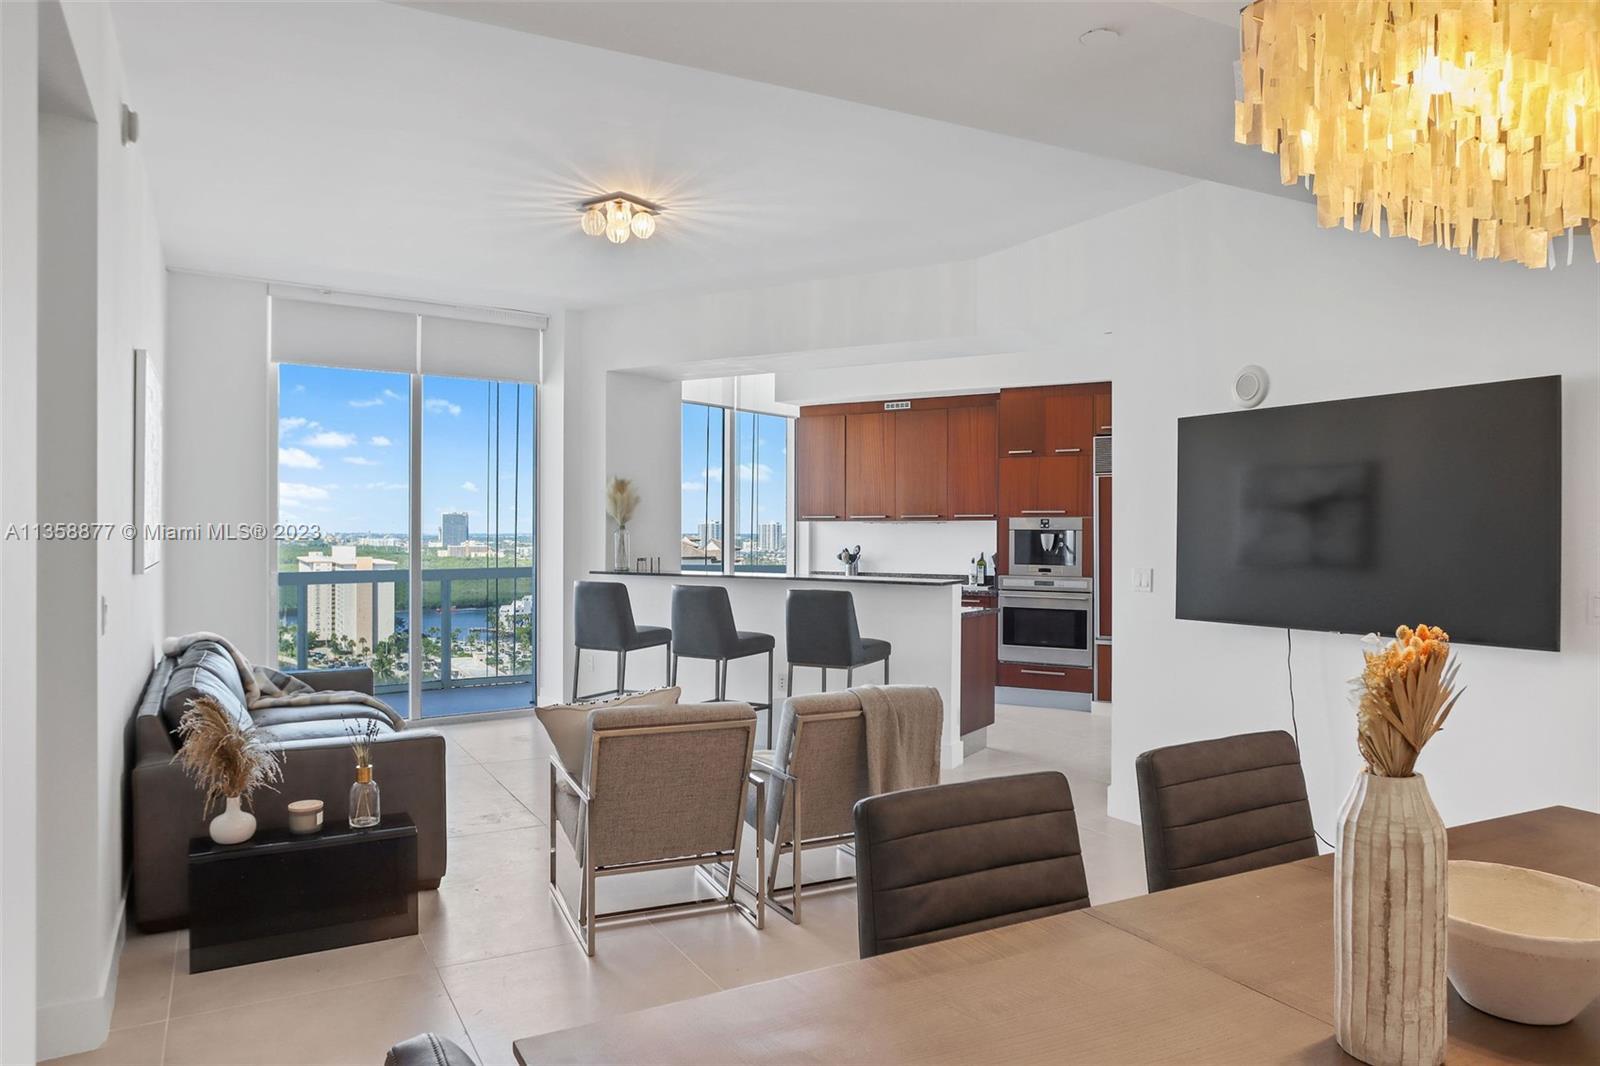 Welcome to Trump Towers, where luxury meets convenience in Sunny Isles Beach. Experience the ultimat